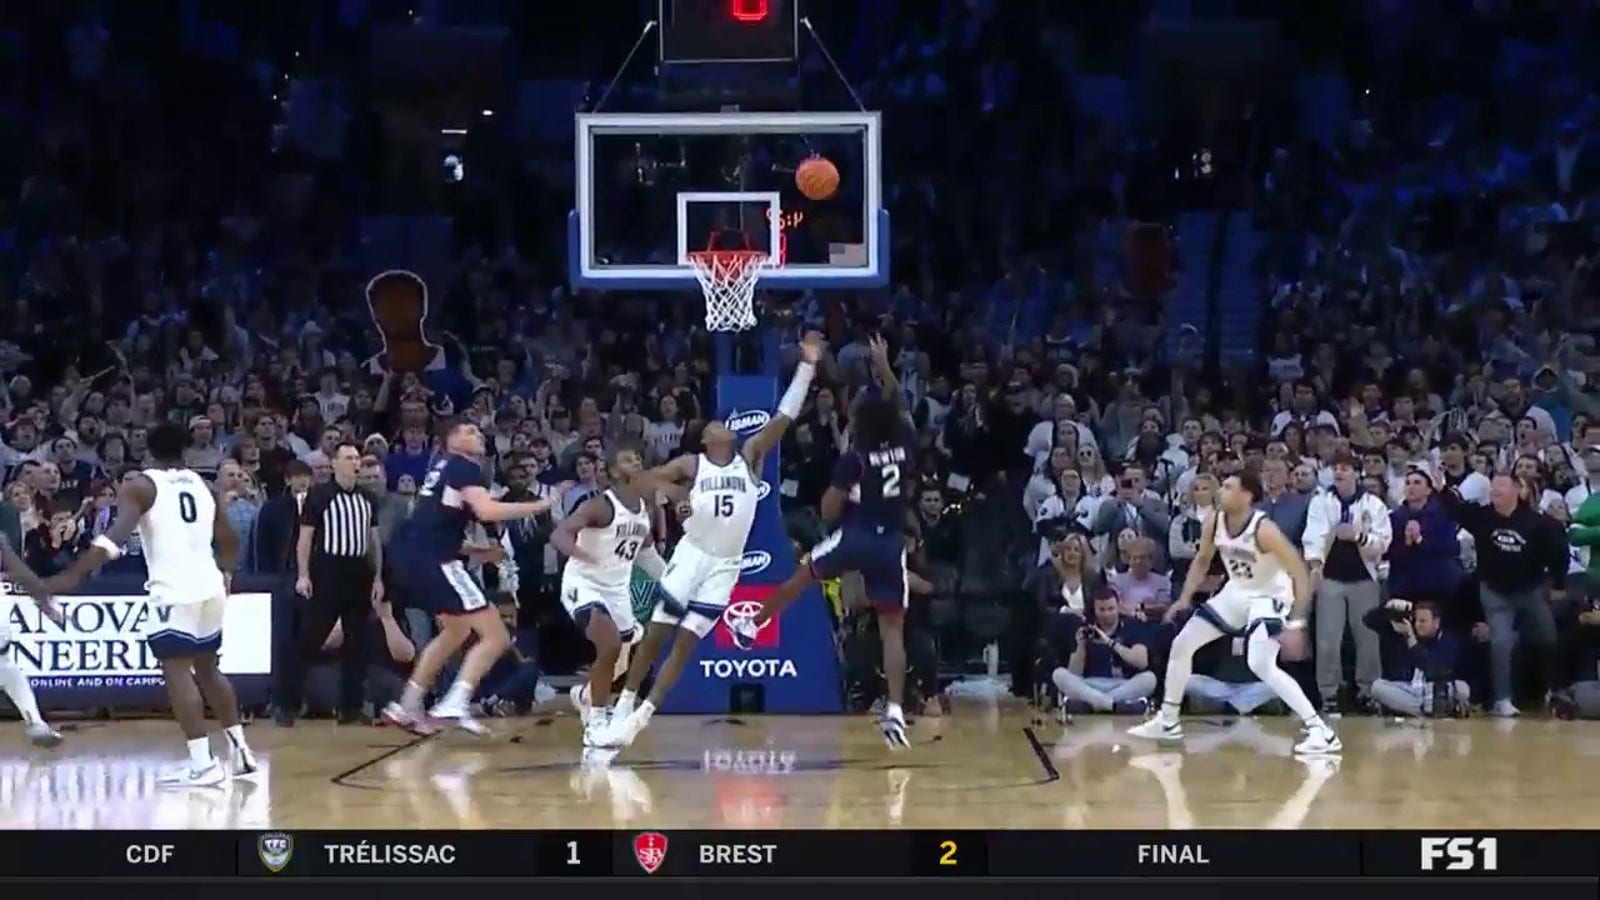 Tristen Newton gets crafty with a floater to give UConn the lead over Villanova